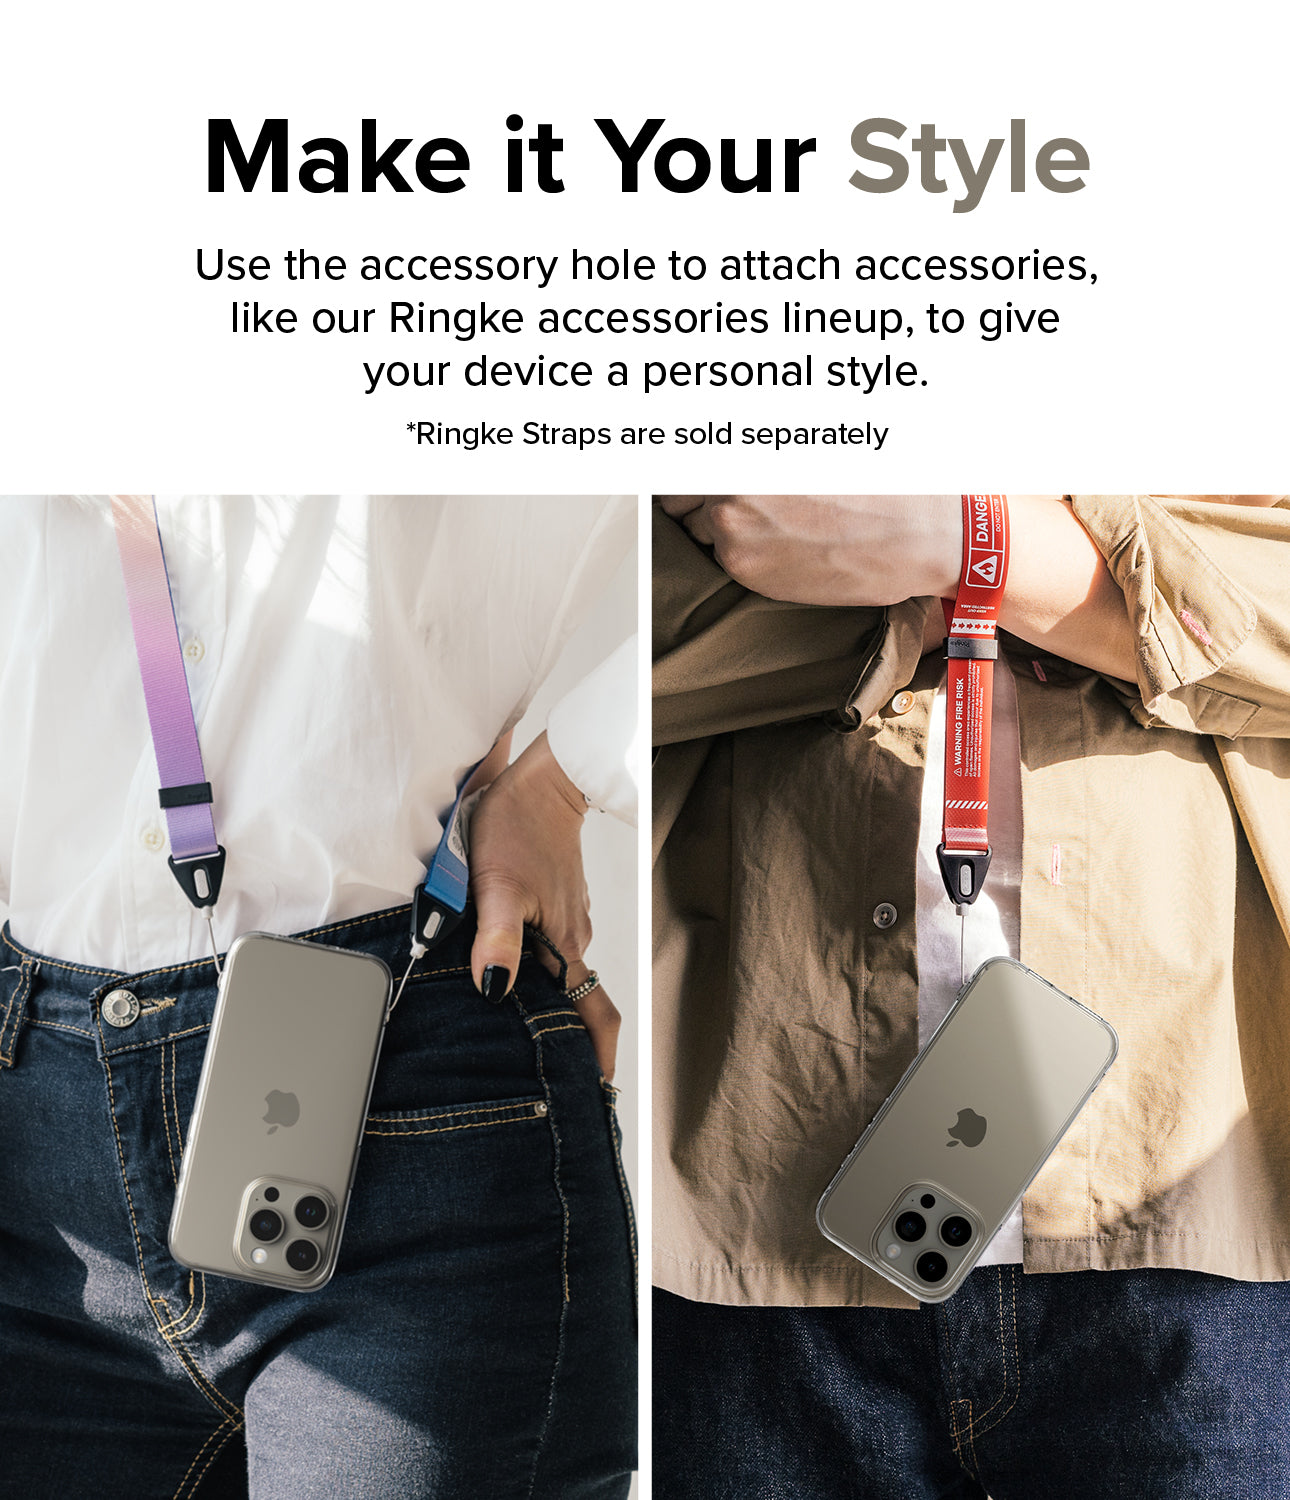 iPhone 15 Pro Max Case | Fusion Clear - Make it Your Style. Use the accessory hole to attach accessories, like our Ringke accessories lineup, to give your device a personal style.